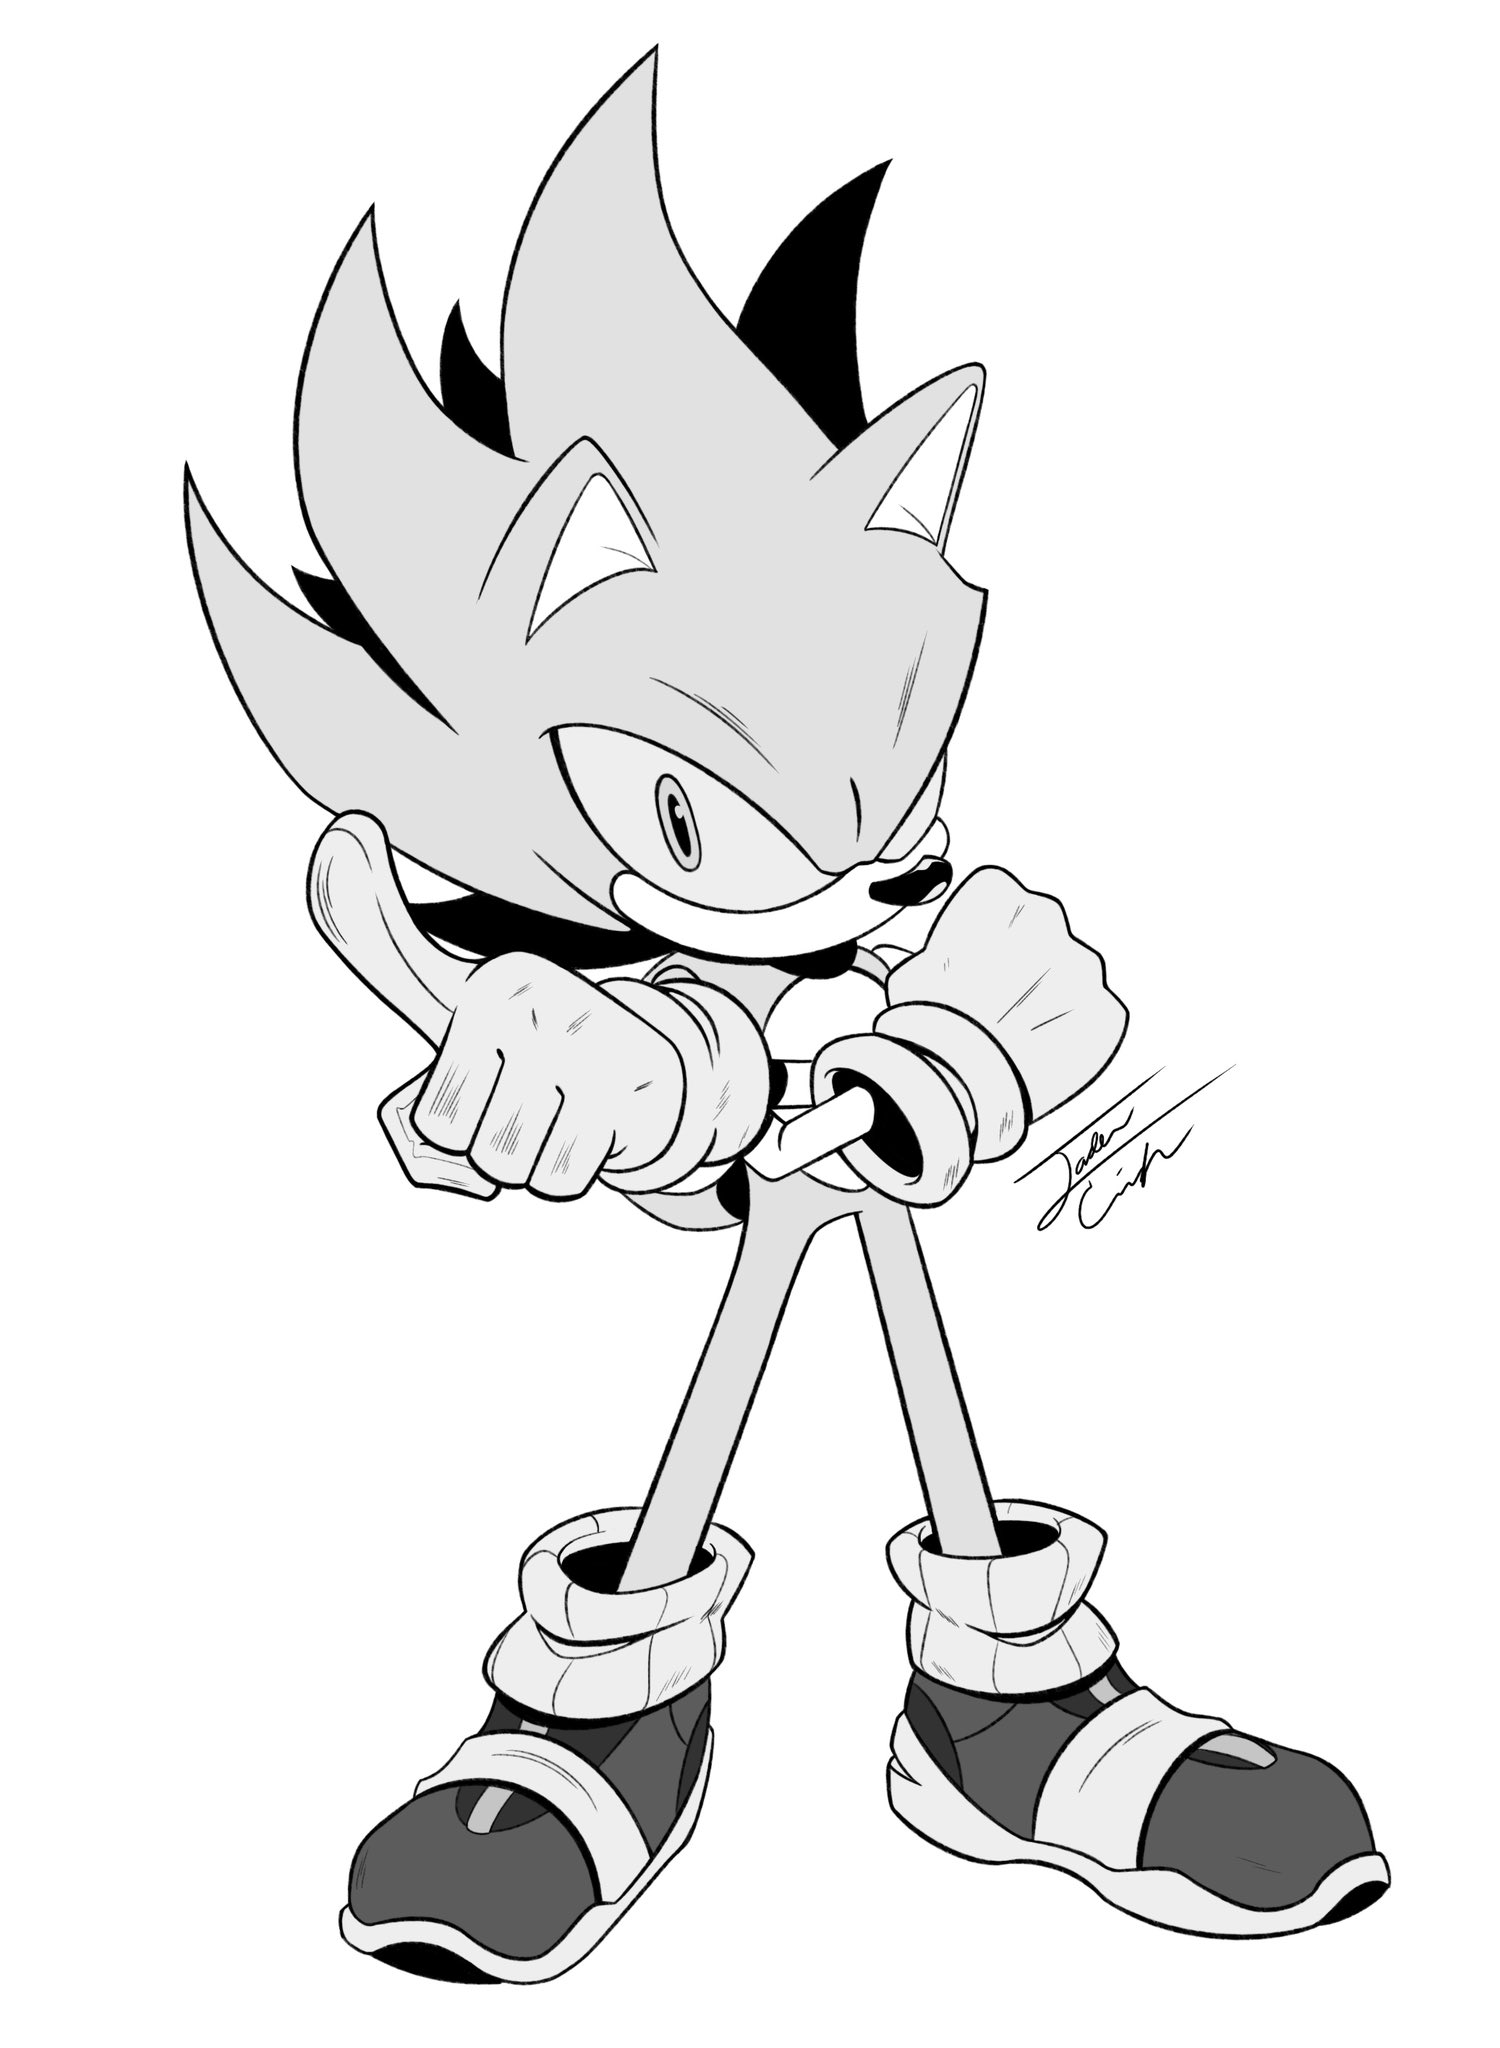 Cunningham sketches on x drew super sonic for the first time might color it later sonic sonicthehedgehog sonicfanart httpstcoauccjjjyqr x